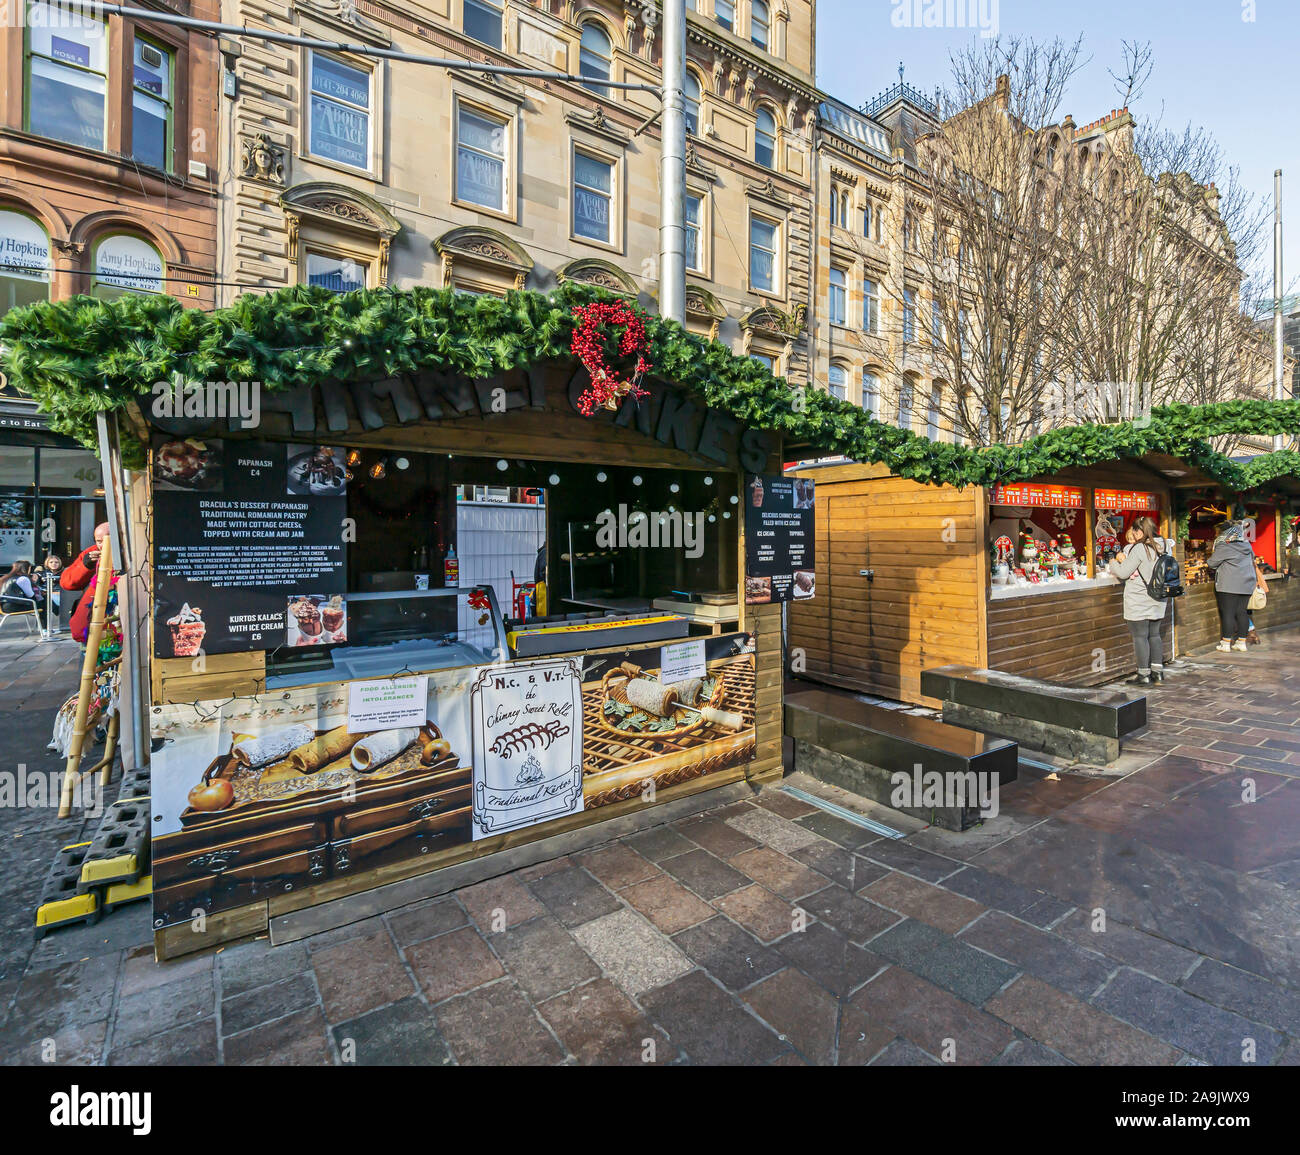 Glasgow Christmas Market 2019 in St Enoch Square Glasgow Scotland with stalls Stock Photo